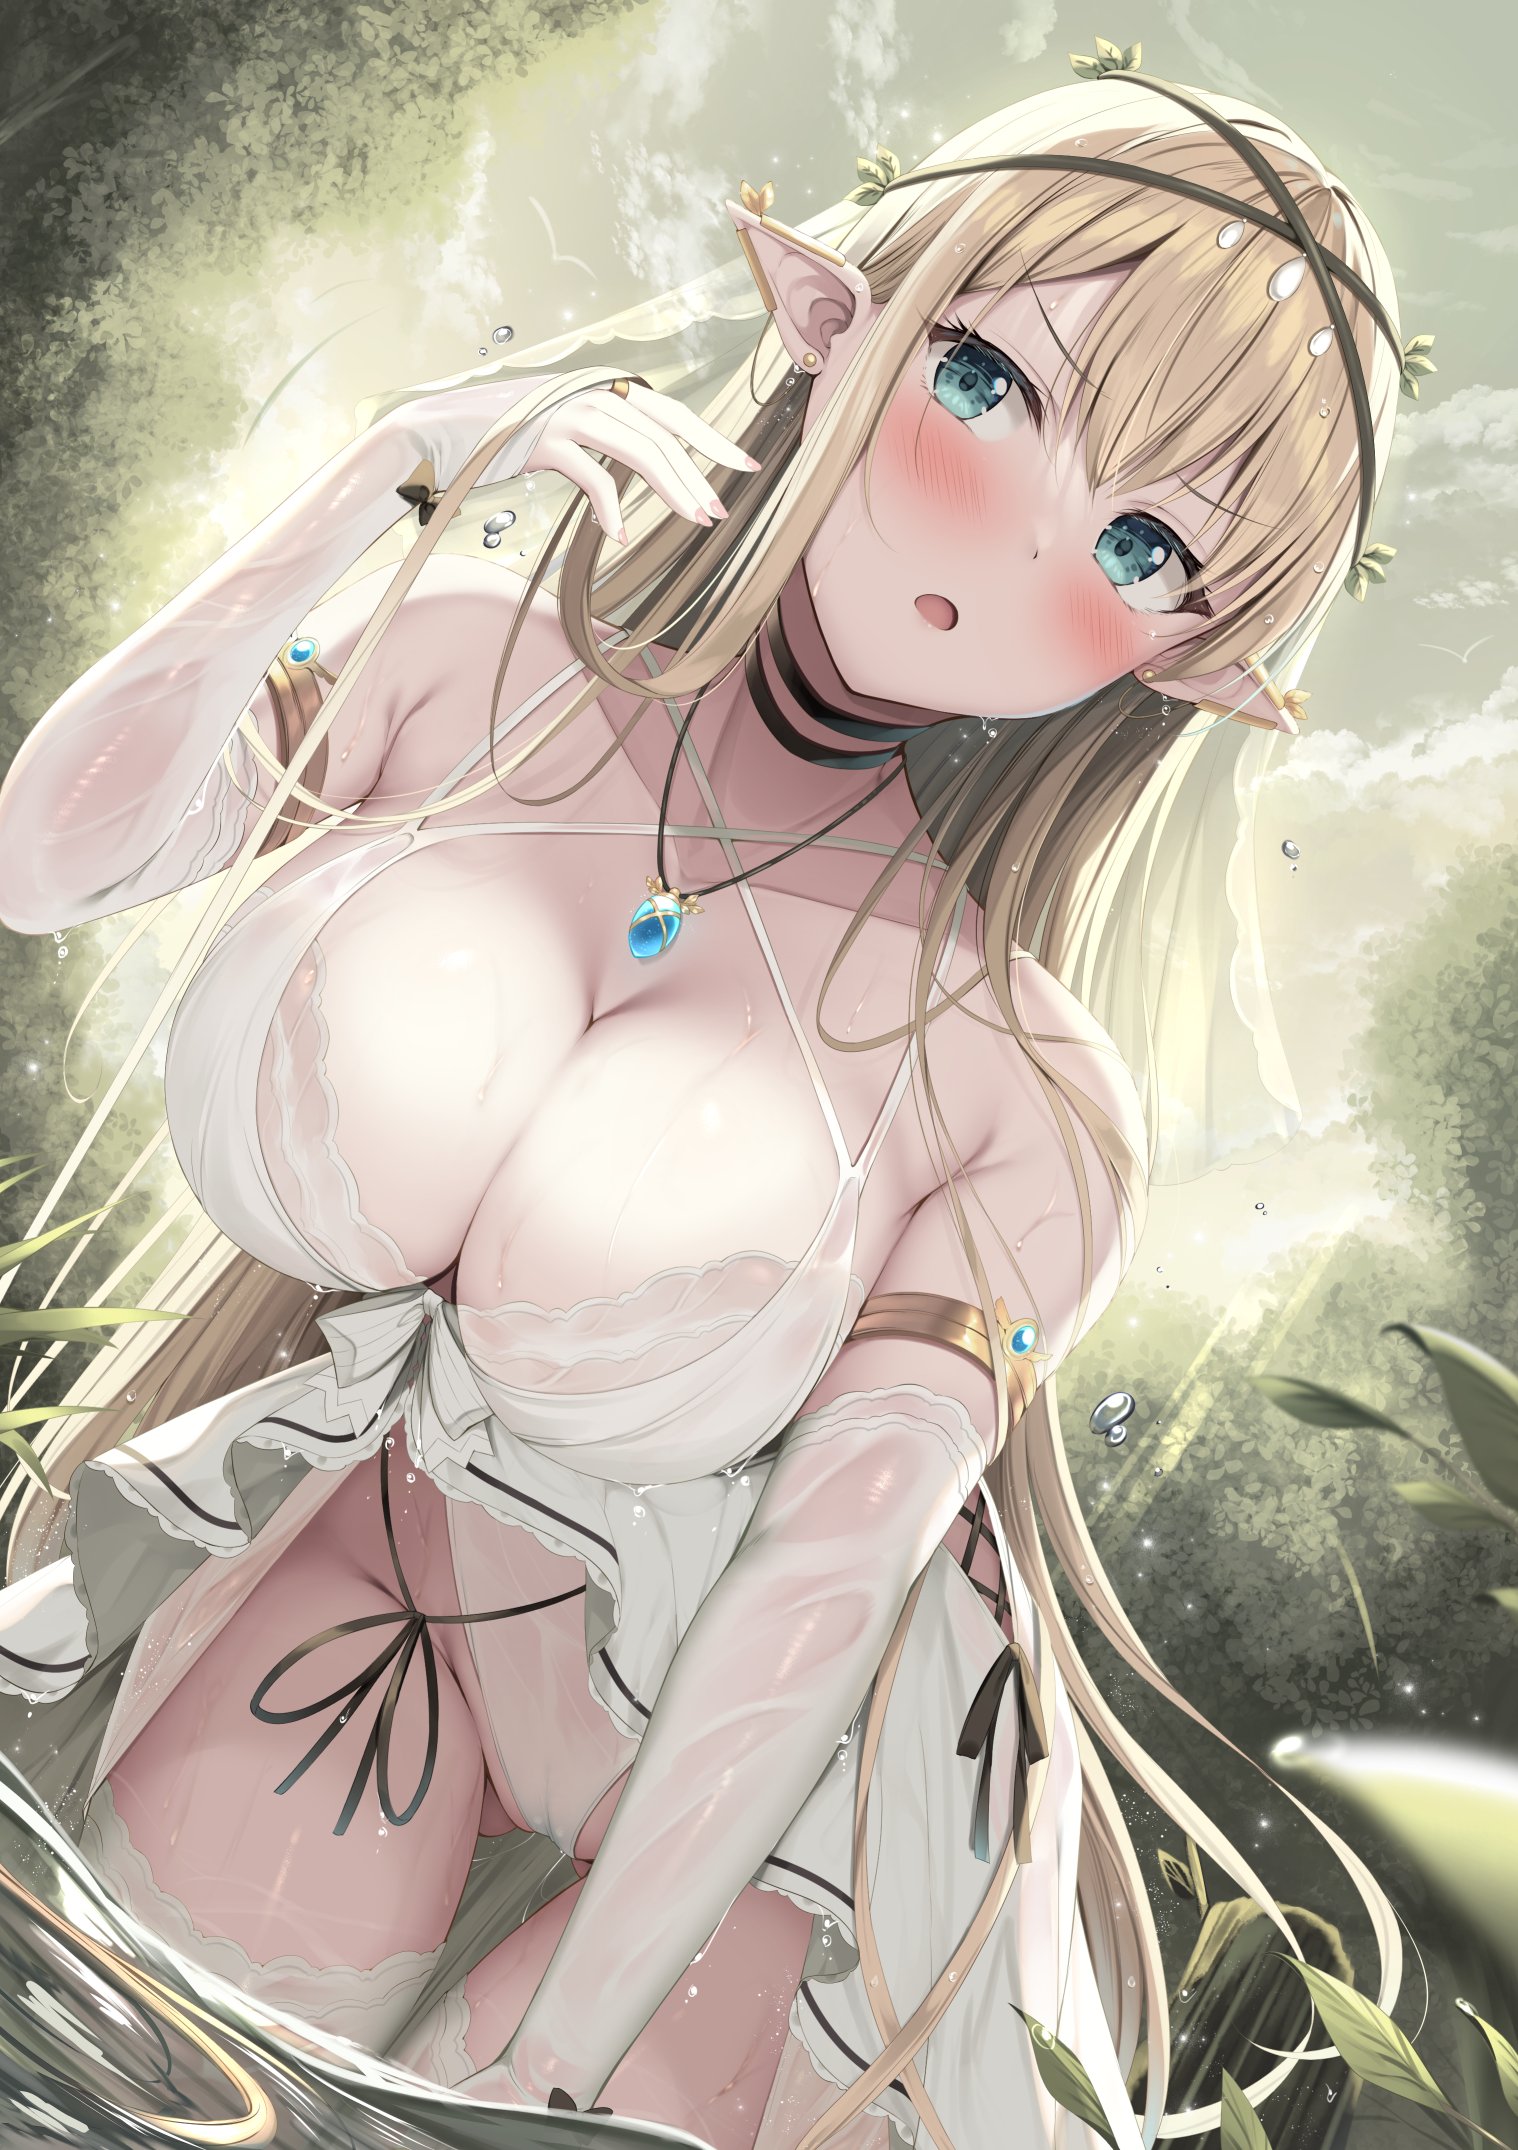 Anime 1518x2150 anime anime girls big boobs wet clothing lingerie cleavage pointy ears blonde green eyes Tomoo bent over blushing